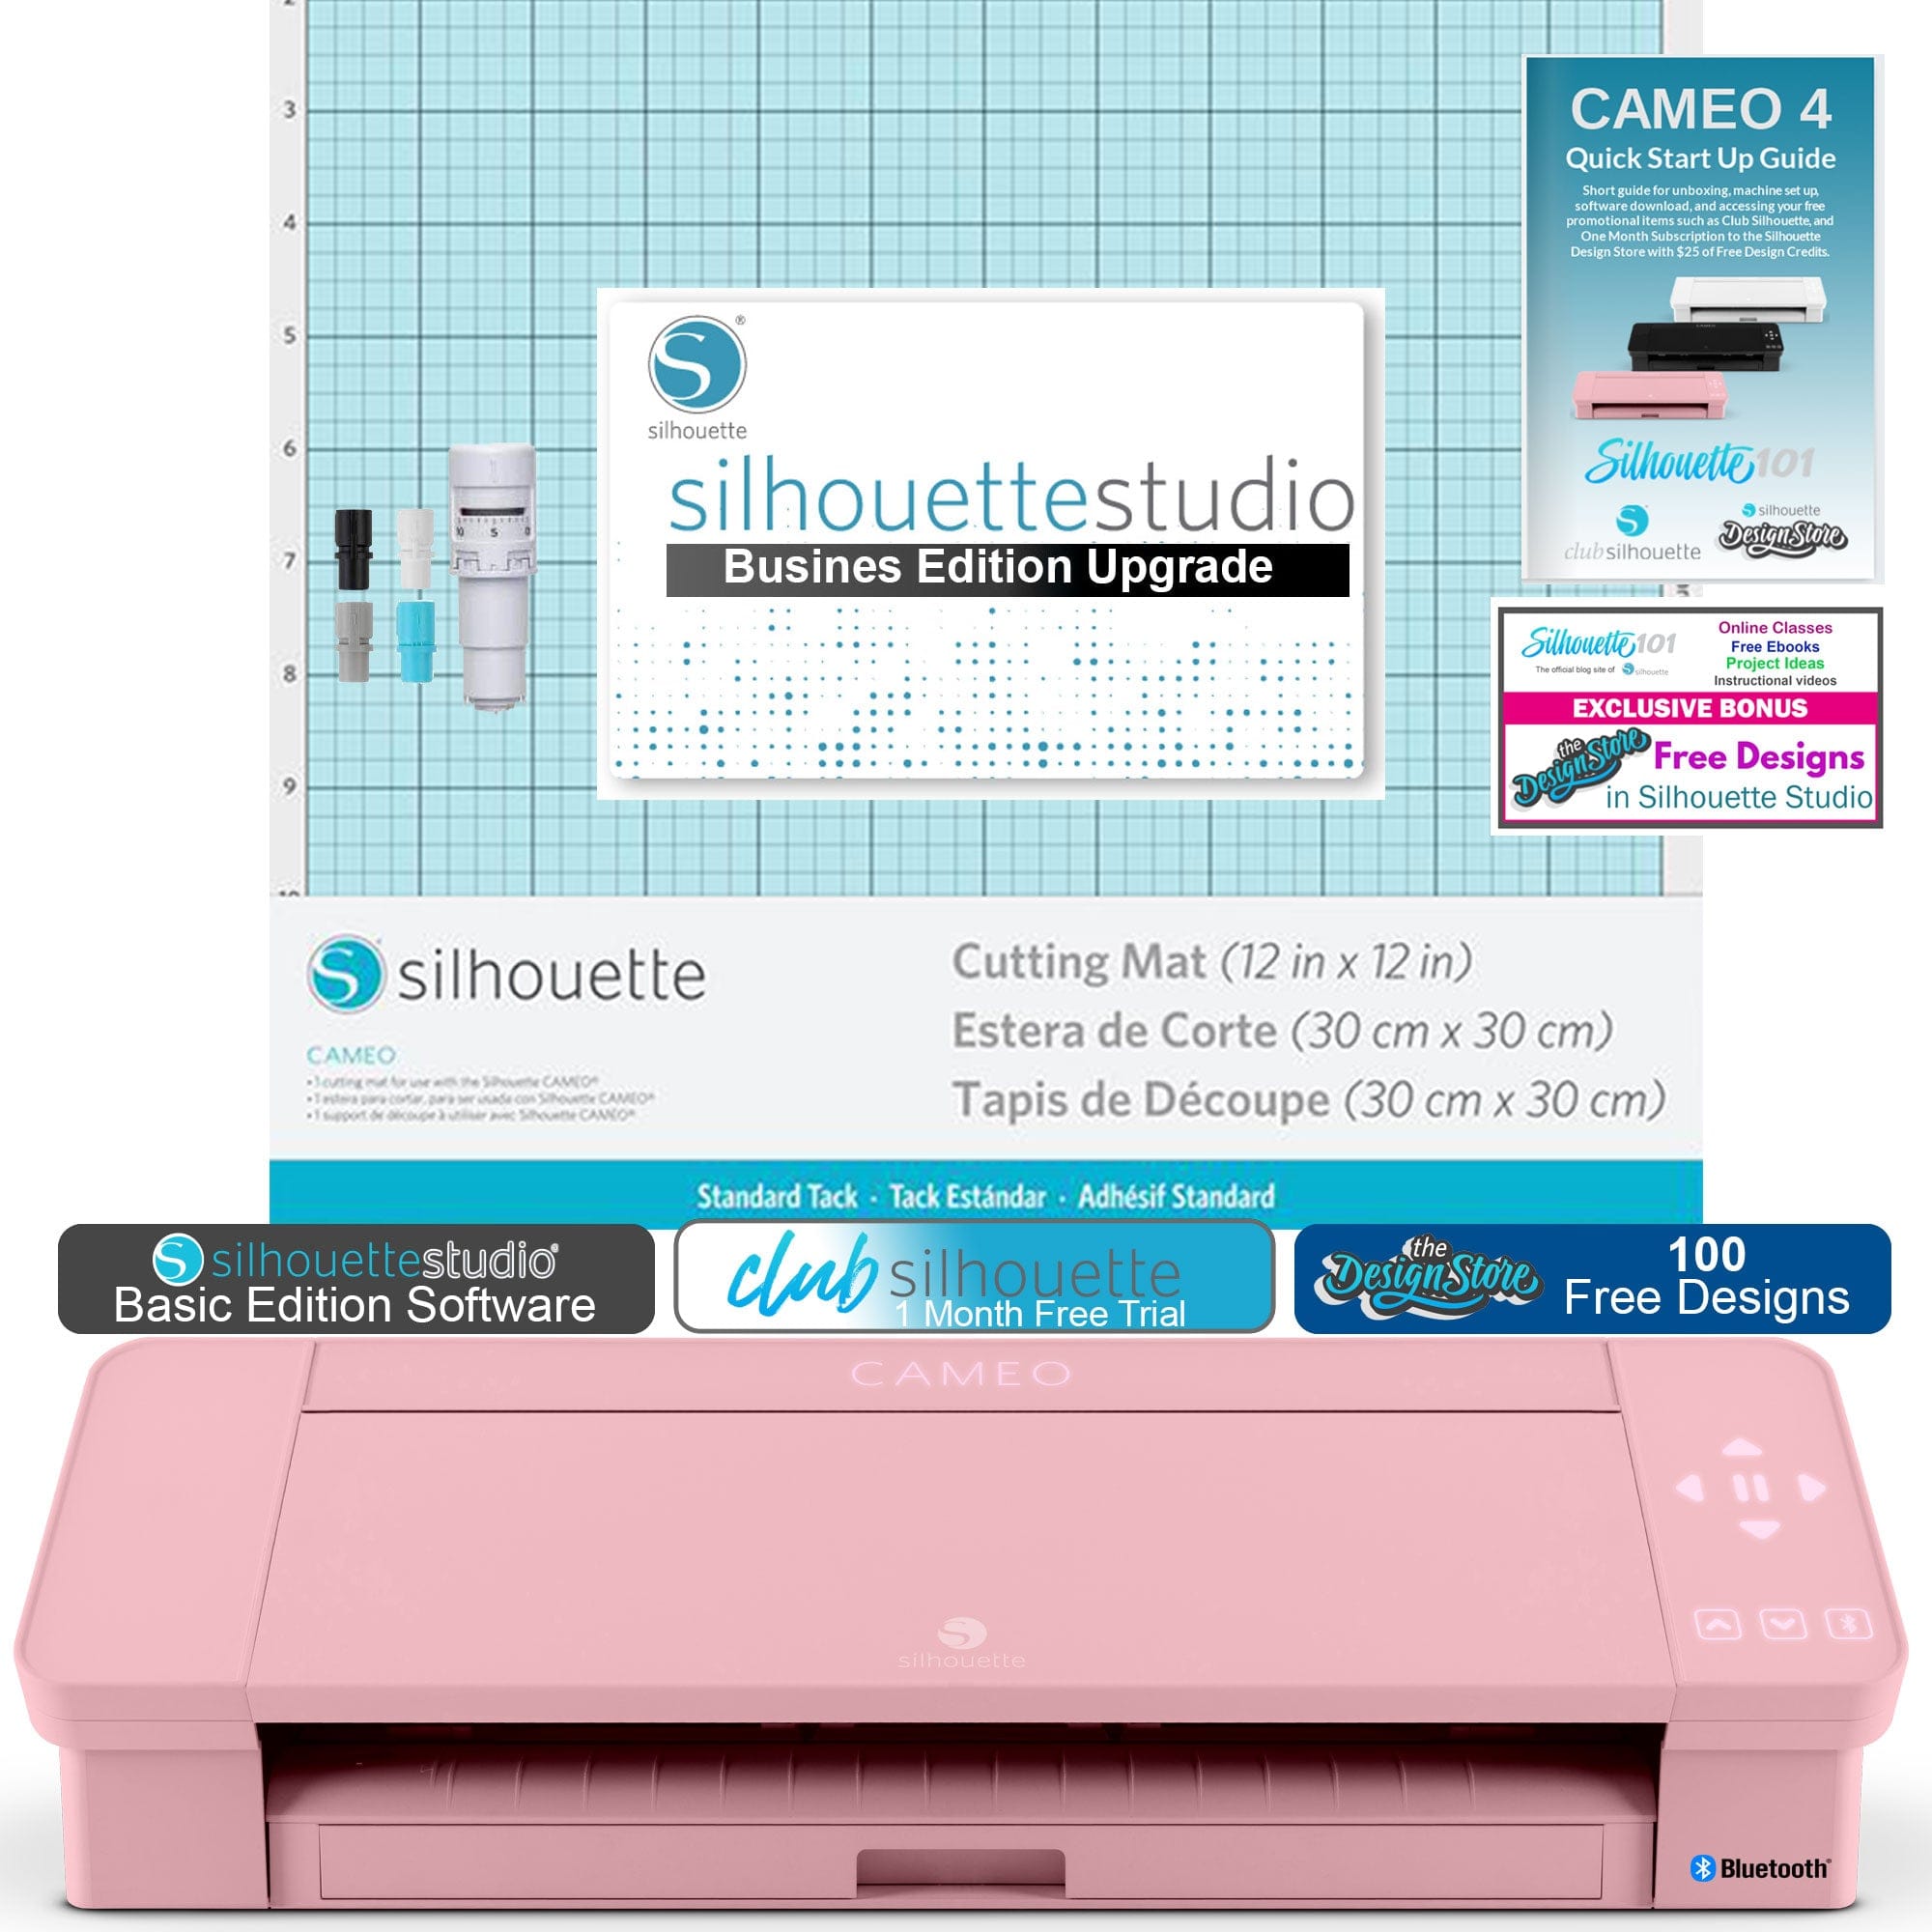 Silhouette America Silhouette Cameo 4 12" Vinyl Cutting Pink Edition Bundle with Silhouette Studio Business Edition Software